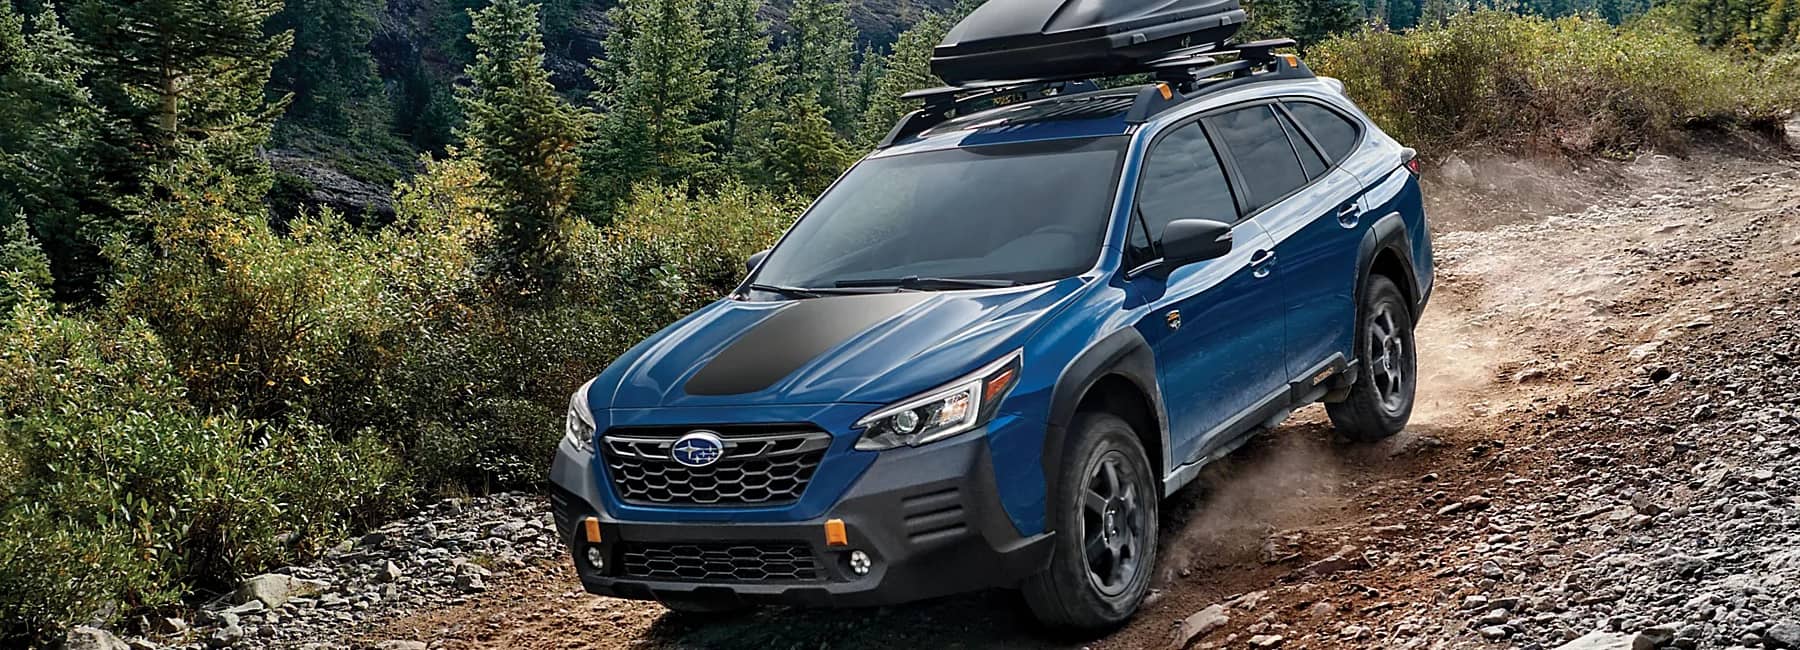 Blue 2022 Subaru Outback- driving down rocky forest trail